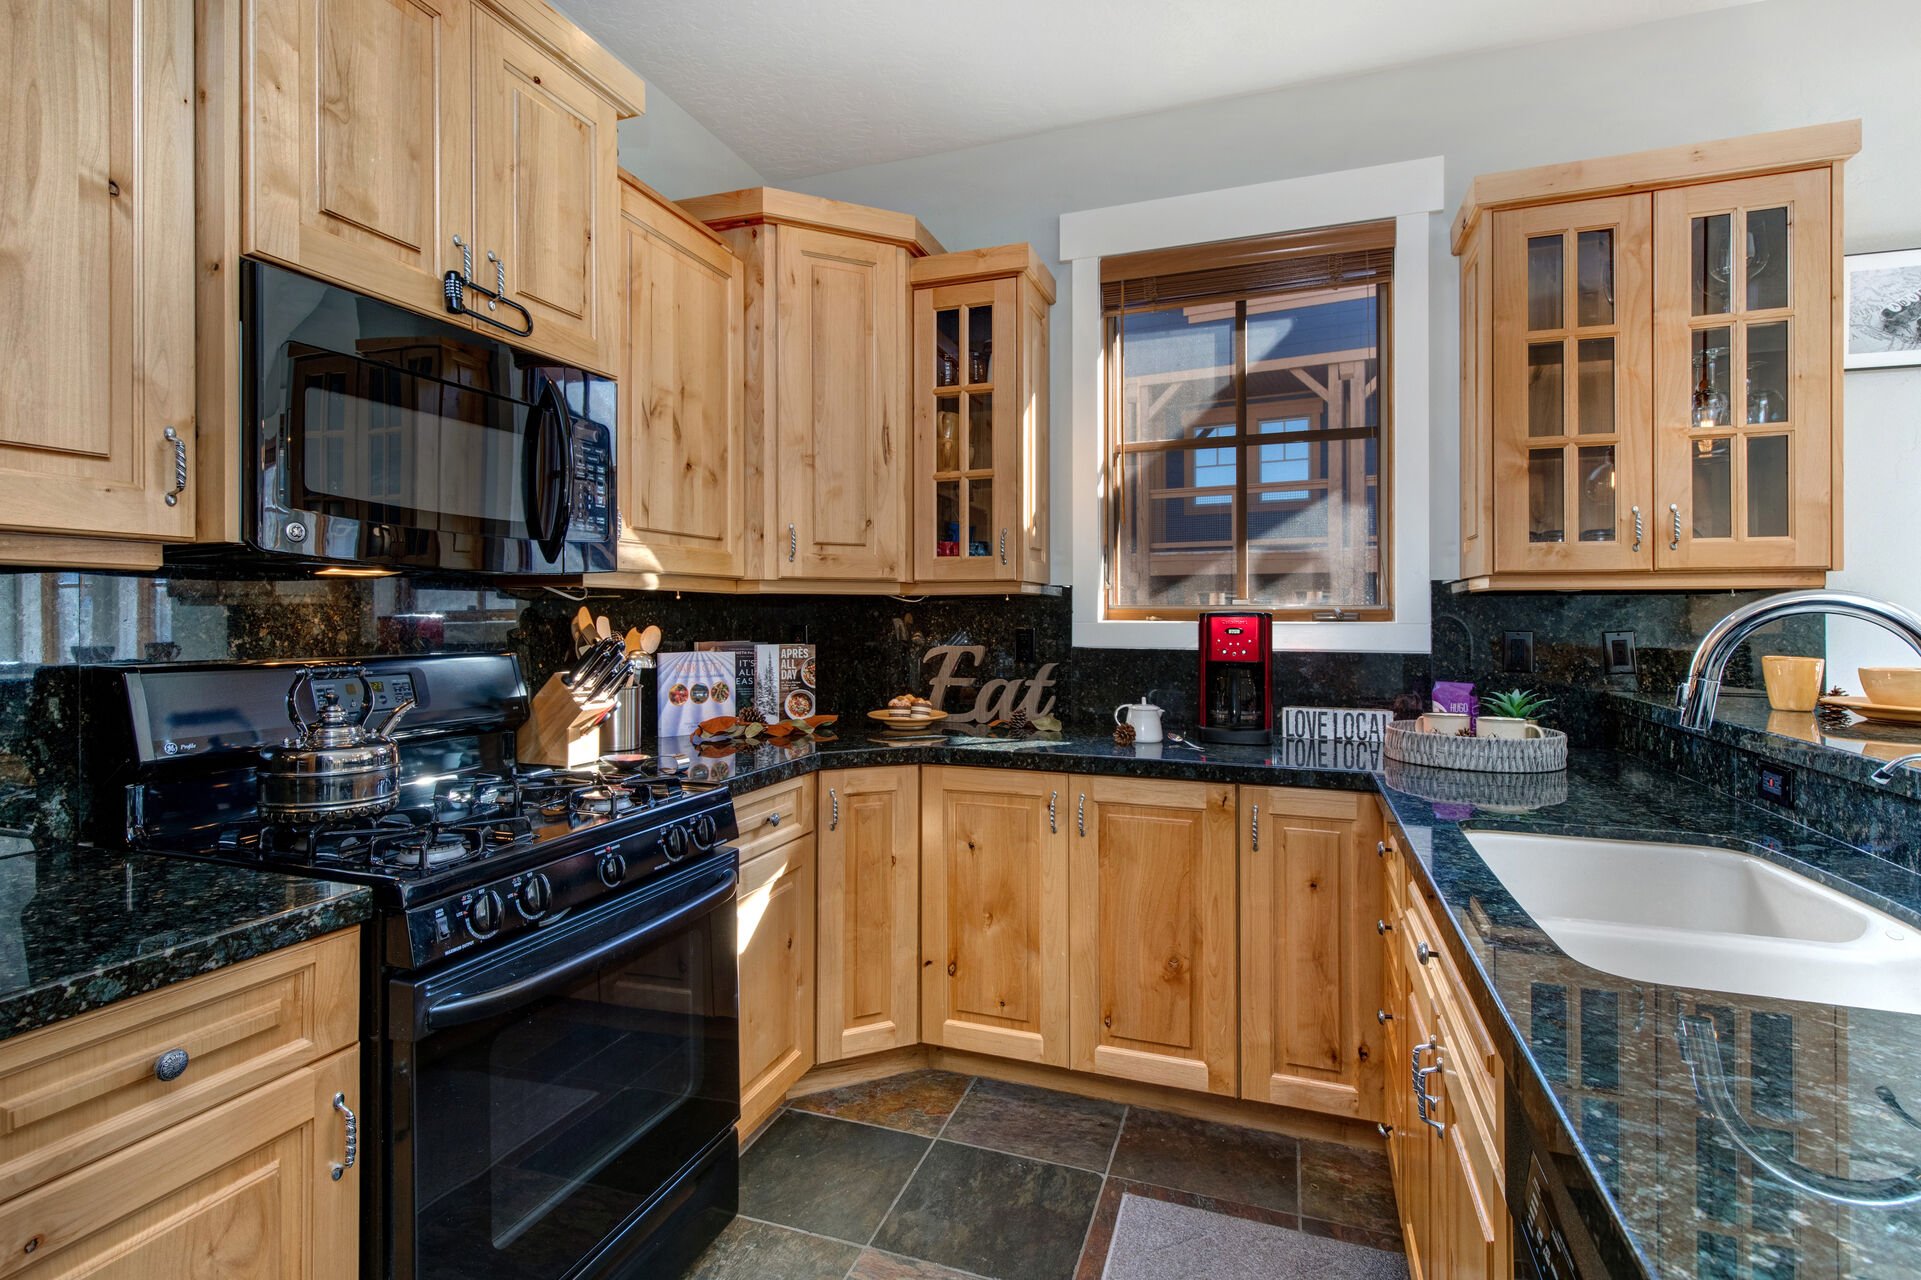 Fully Equipped Kitchen with stone countertops, ice-maker, and bar seating for 3